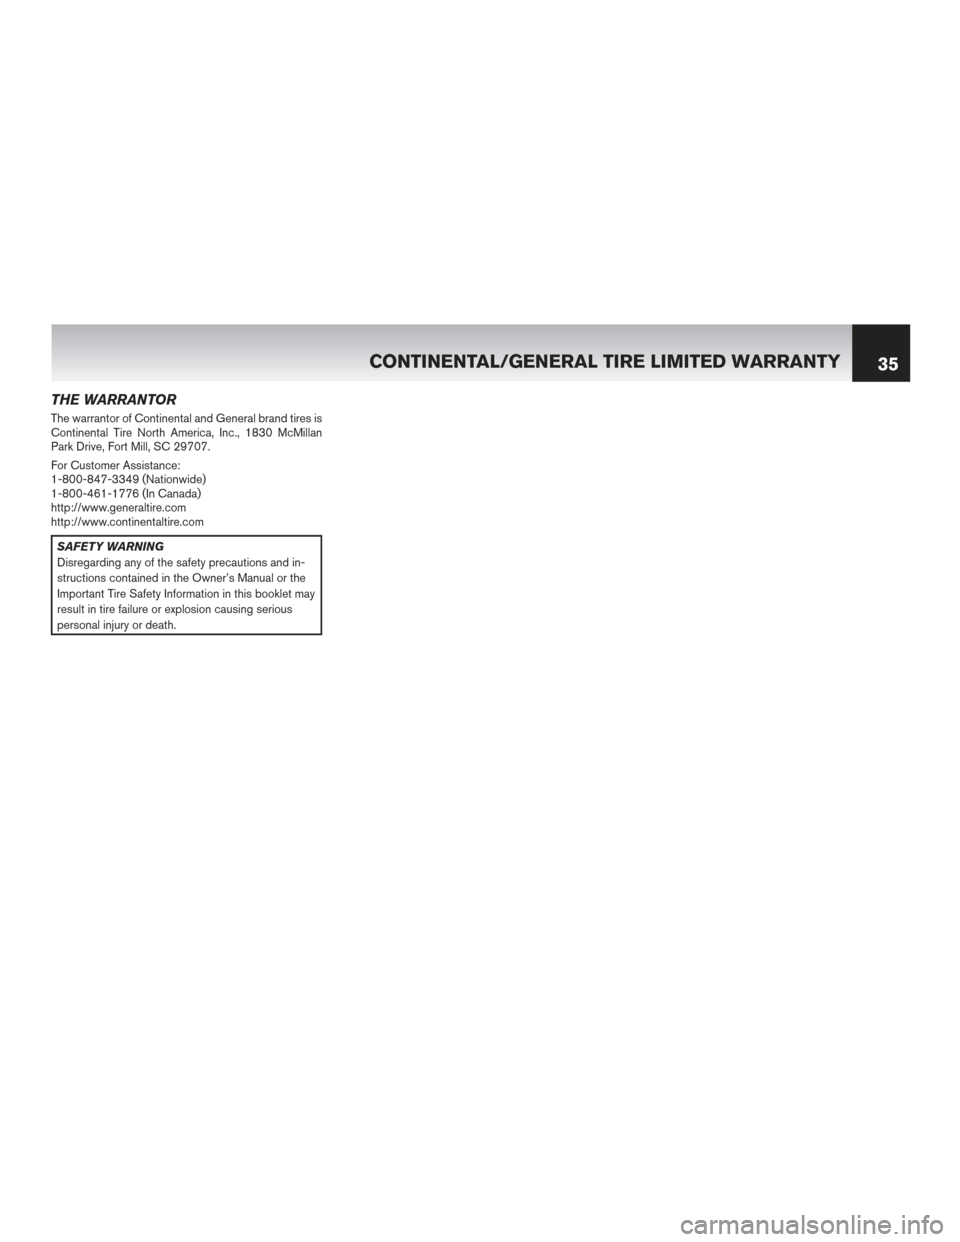 NISSAN QUEST 2017 RE52 / 4.G Warranty Booklet THE WARRANTOR
The warrantor of Continental and General brand tires is
Continental Tire North America, Inc., 1830 McMillan
Park Drive, Fort Mill, SC 29707.
For Customer Assistance:
1-800-847-3349 (Nati